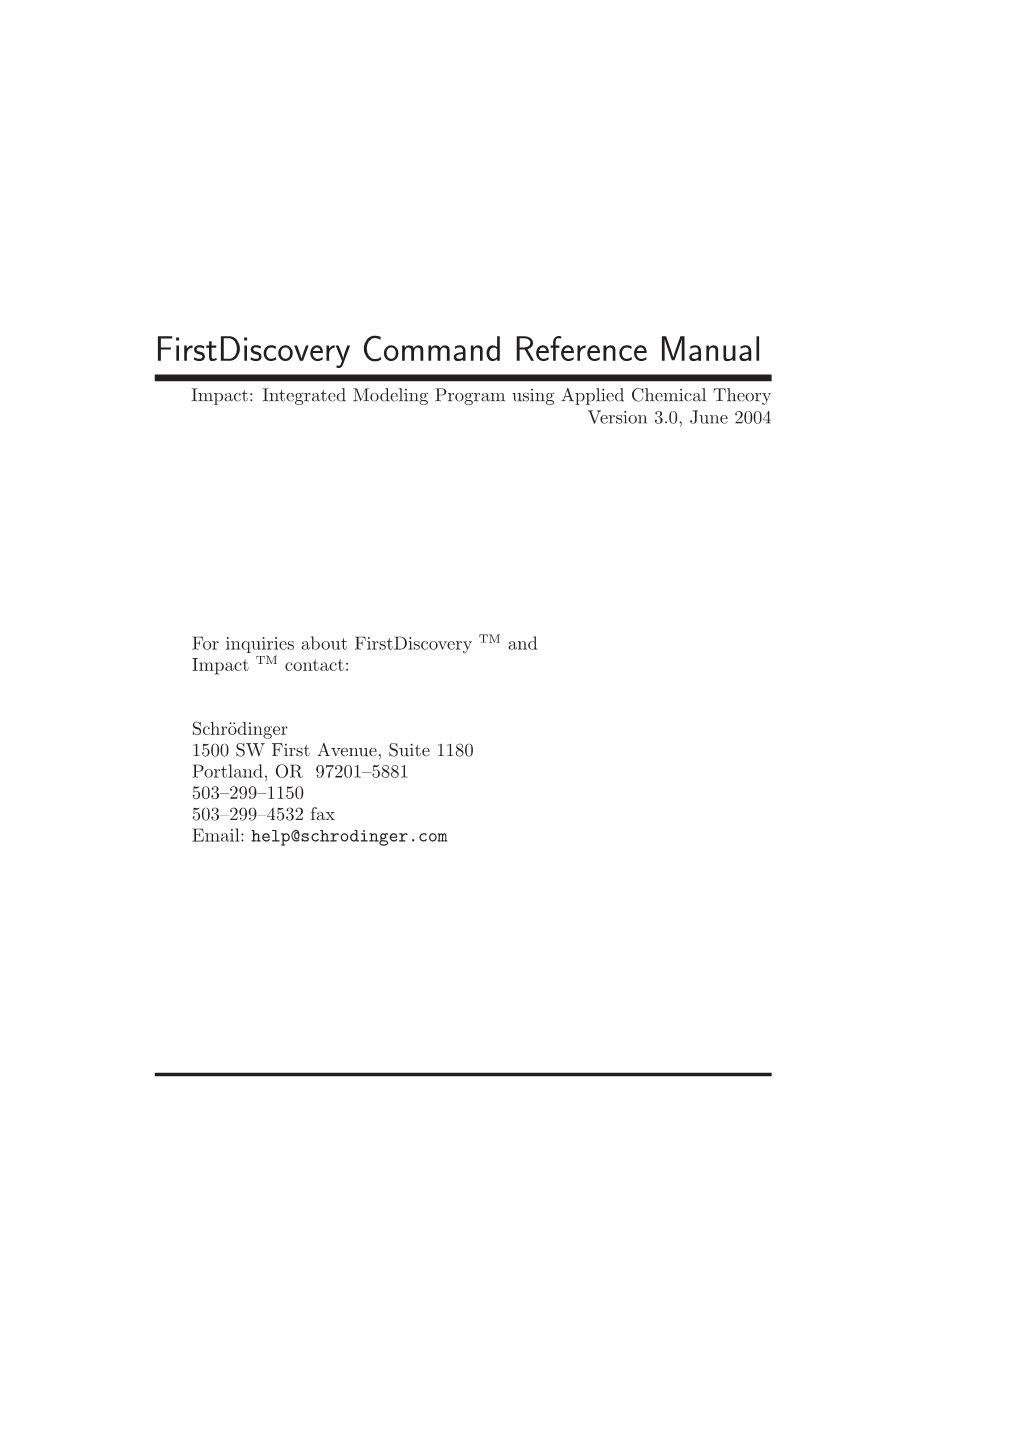 Firstdiscovery Command Reference Manual Impact: Integrated Modeling Program Using Applied Chemical Theory Version 3.0, June 2004